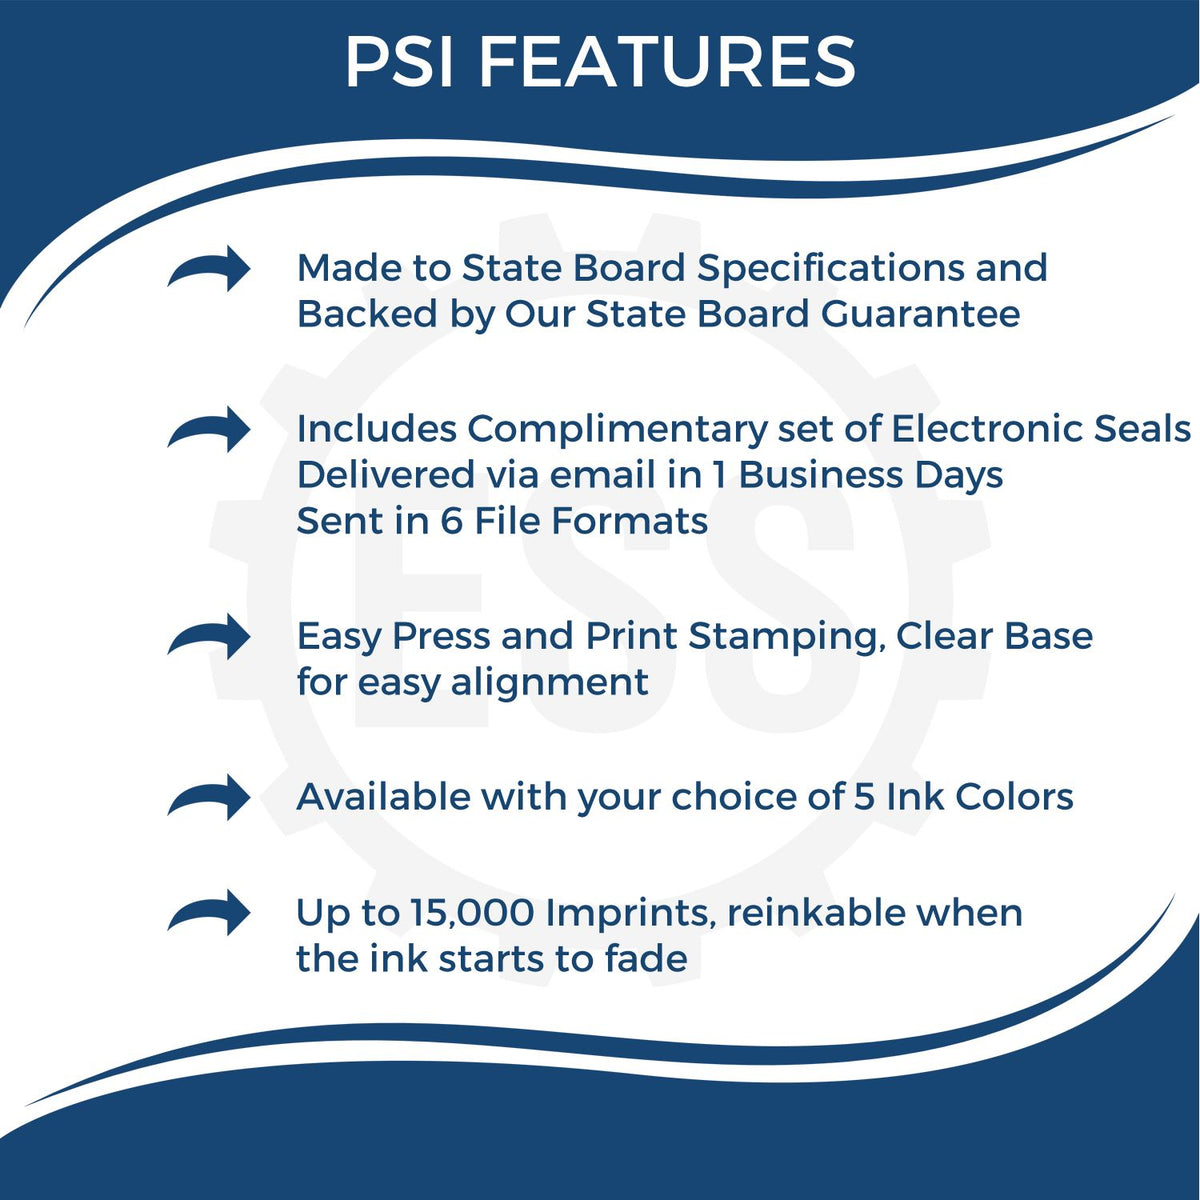 A picture of an infographic highlighting the selling points for the PSI Rhode Island Notary Stamp